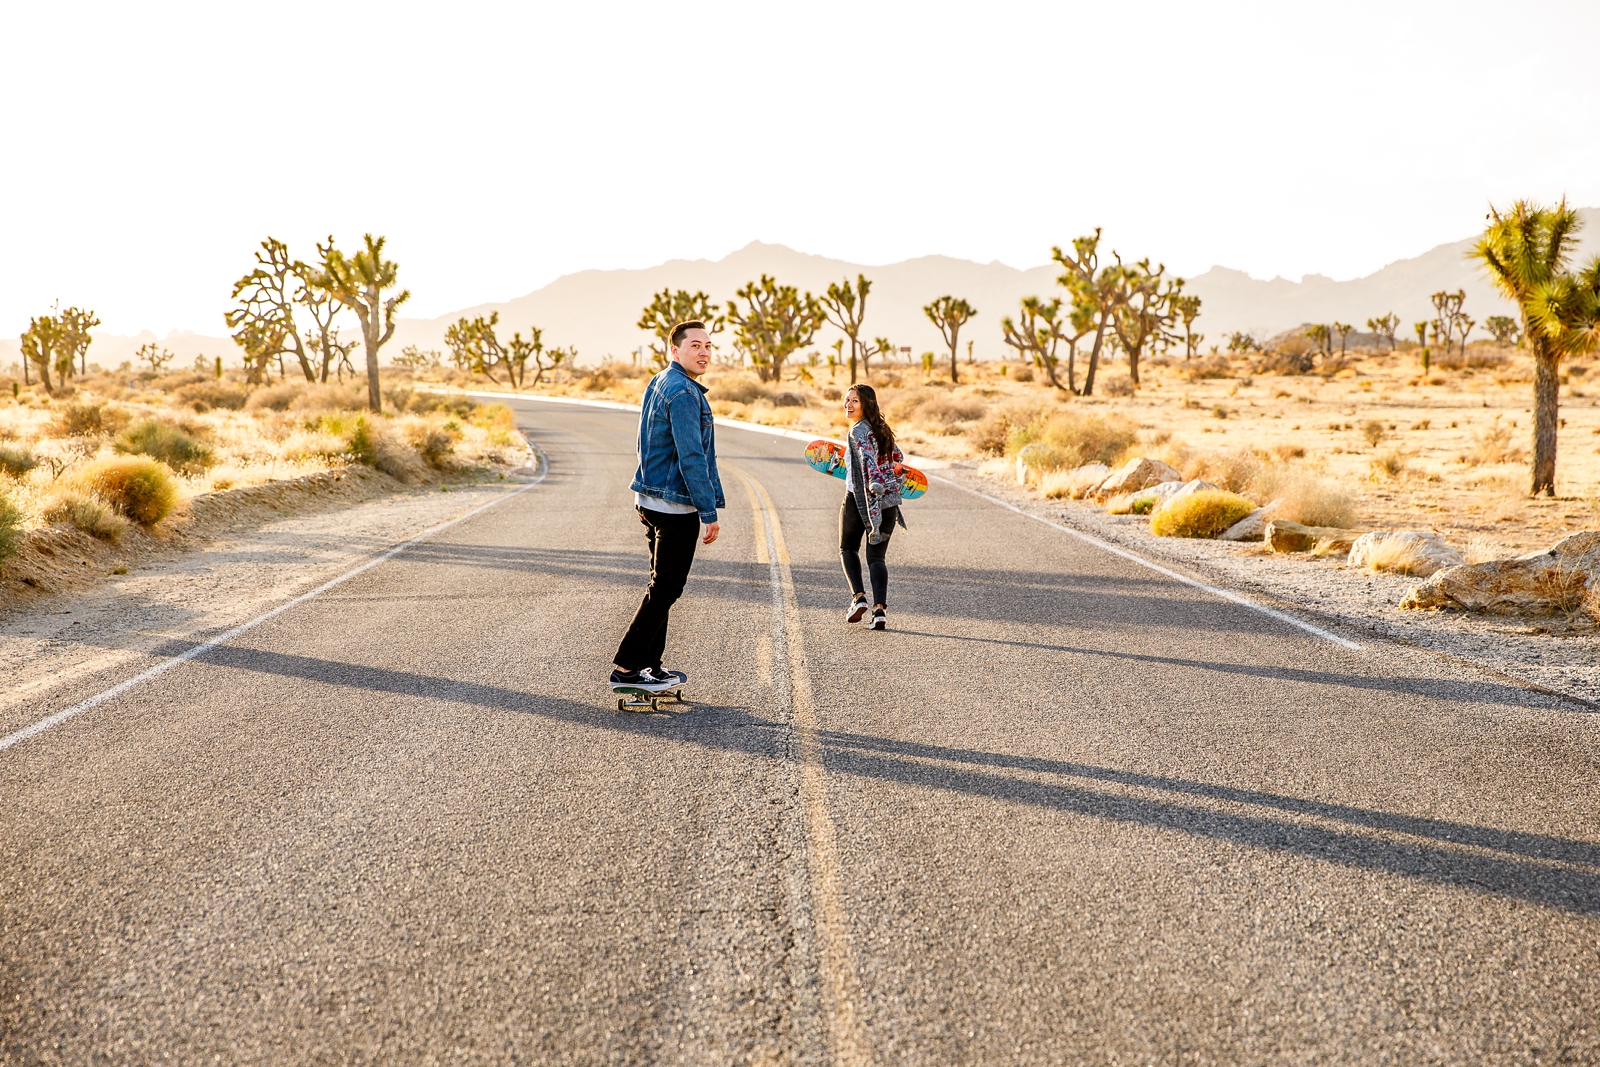 This engaged couple skateboarded in Joshua Tree NP.